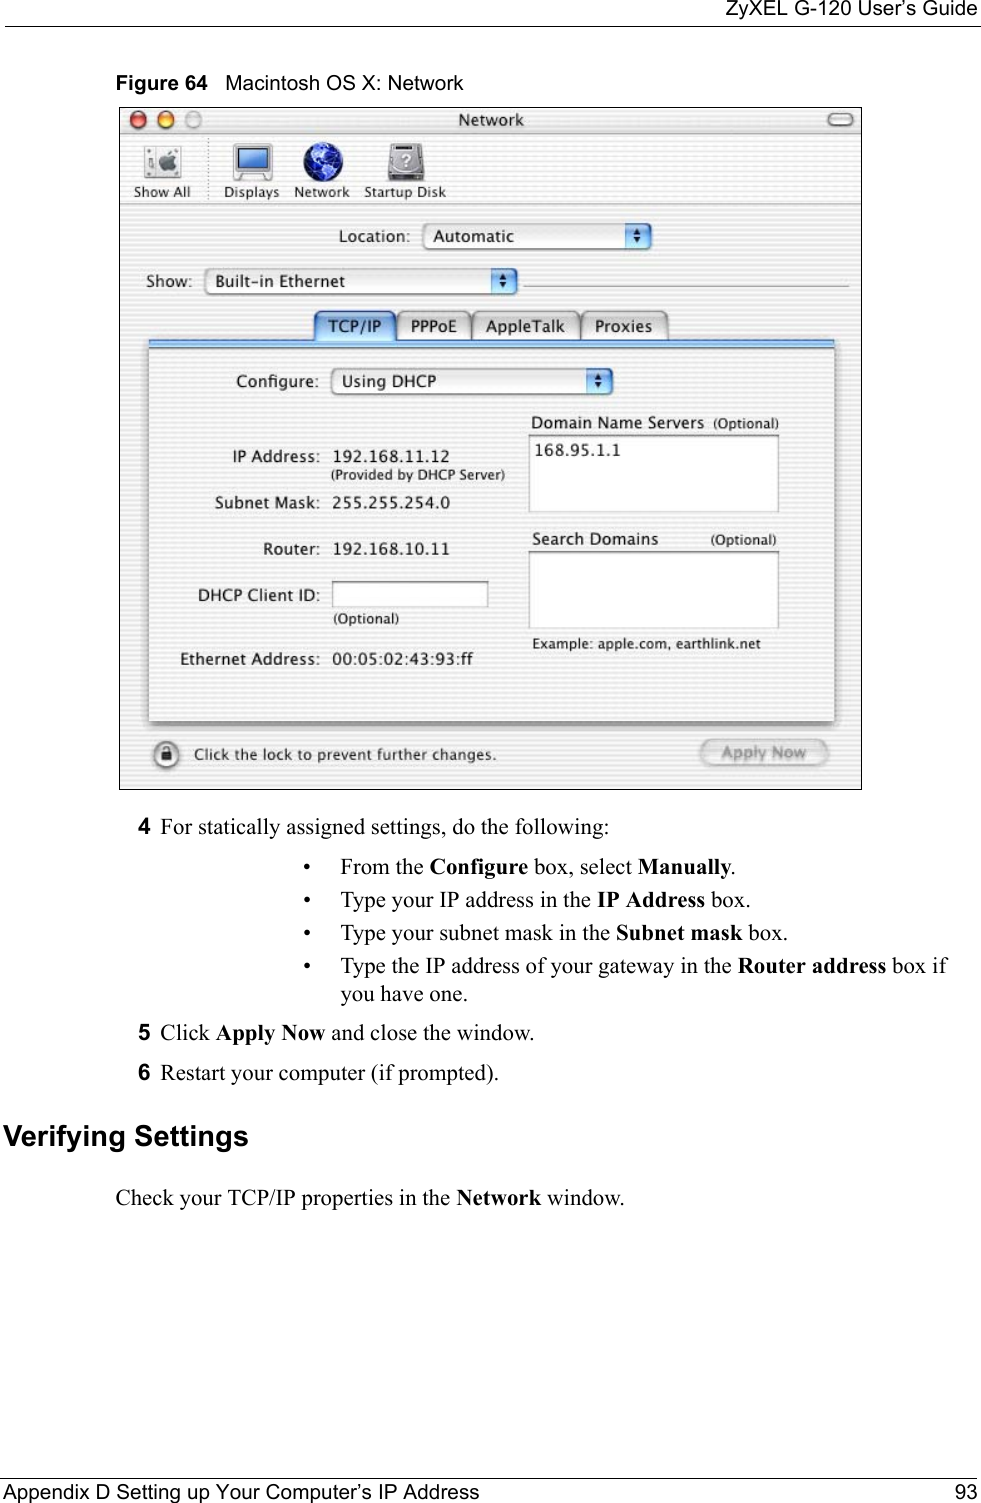 ZyXEL G-120 User’s GuideAppendix D Setting up Your Computer’s IP Address 93Figure 64   Macintosh OS X: Network4For statically assigned settings, do the following:•From the Configure box, select Manually.• Type your IP address in the IP Address box.• Type your subnet mask in the Subnet mask box.• Type the IP address of your gateway in the Router address box if you have one.5Click Apply Now and close the window.6Restart your computer (if prompted).Verifying SettingsCheck your TCP/IP properties in the Network window.